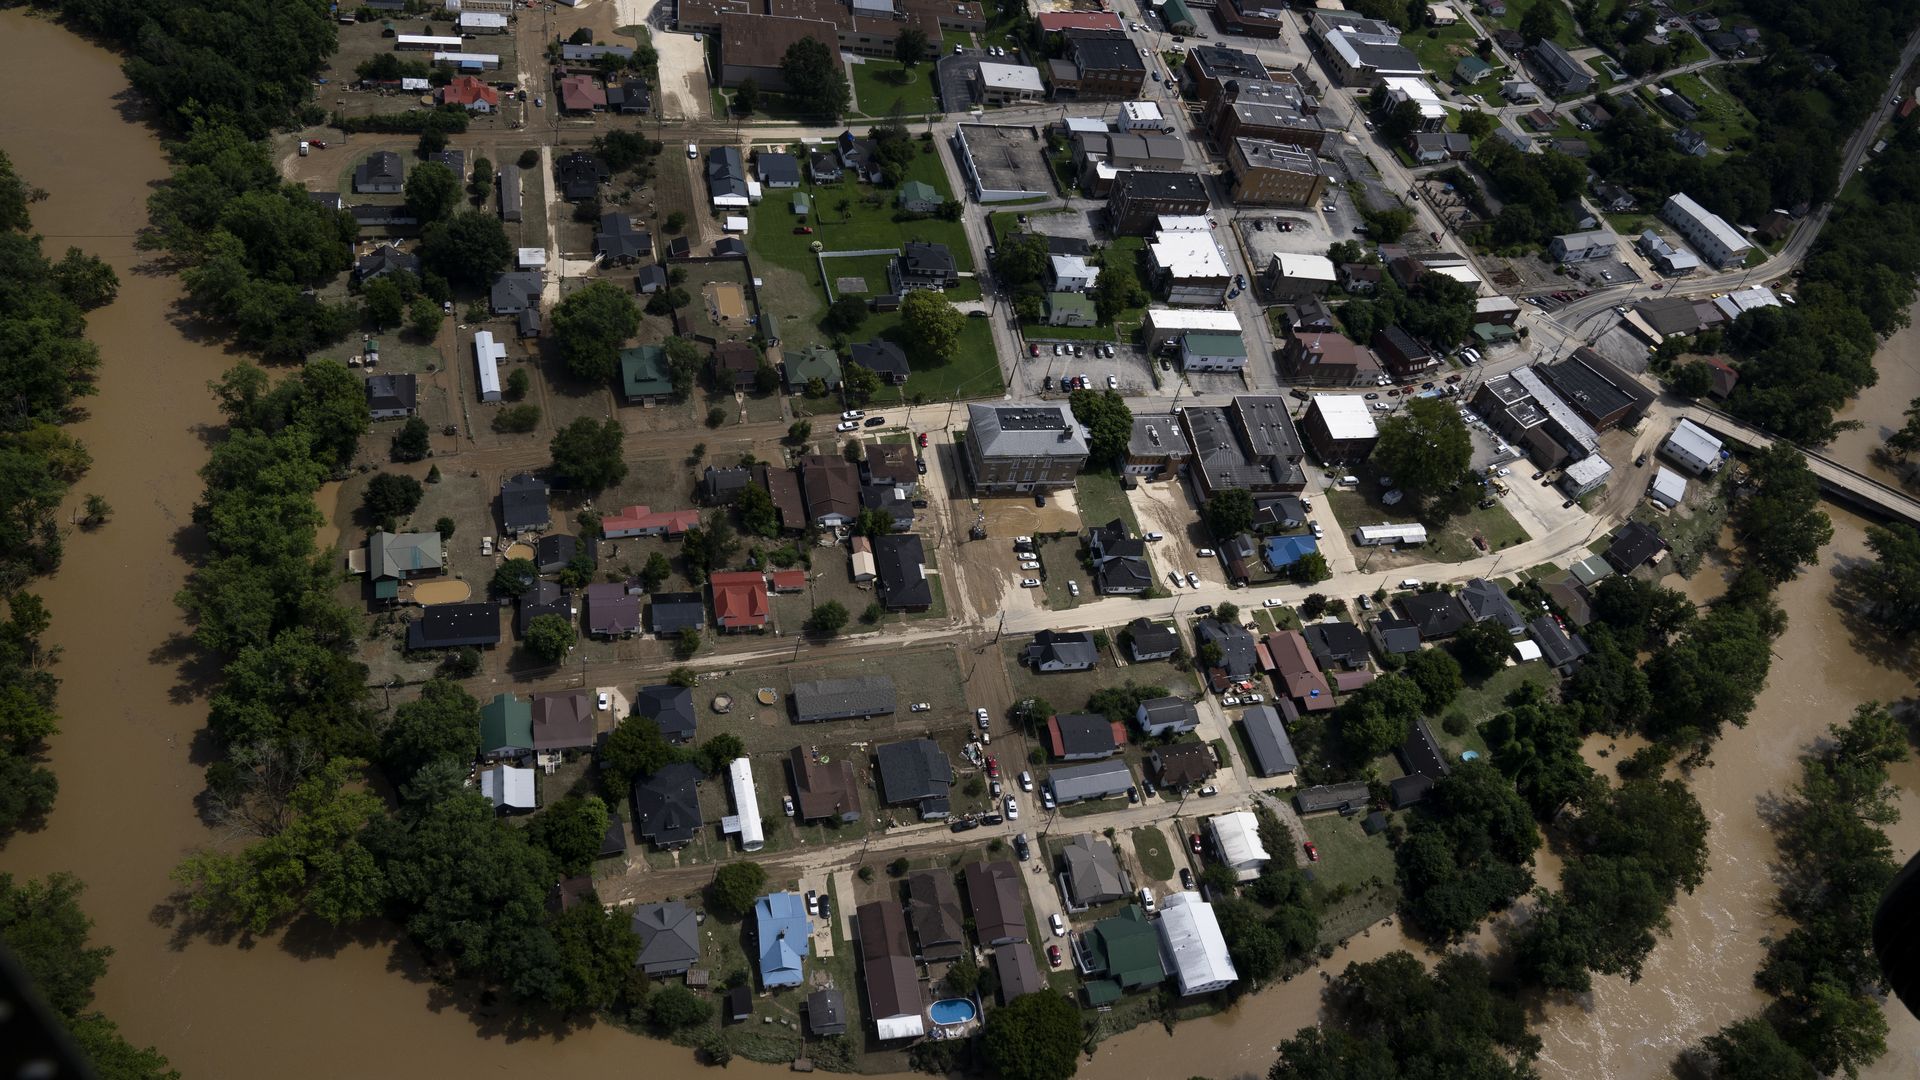 A residential neighborhood that was hit by flooding in Jackson, Kentucky, on July 30.